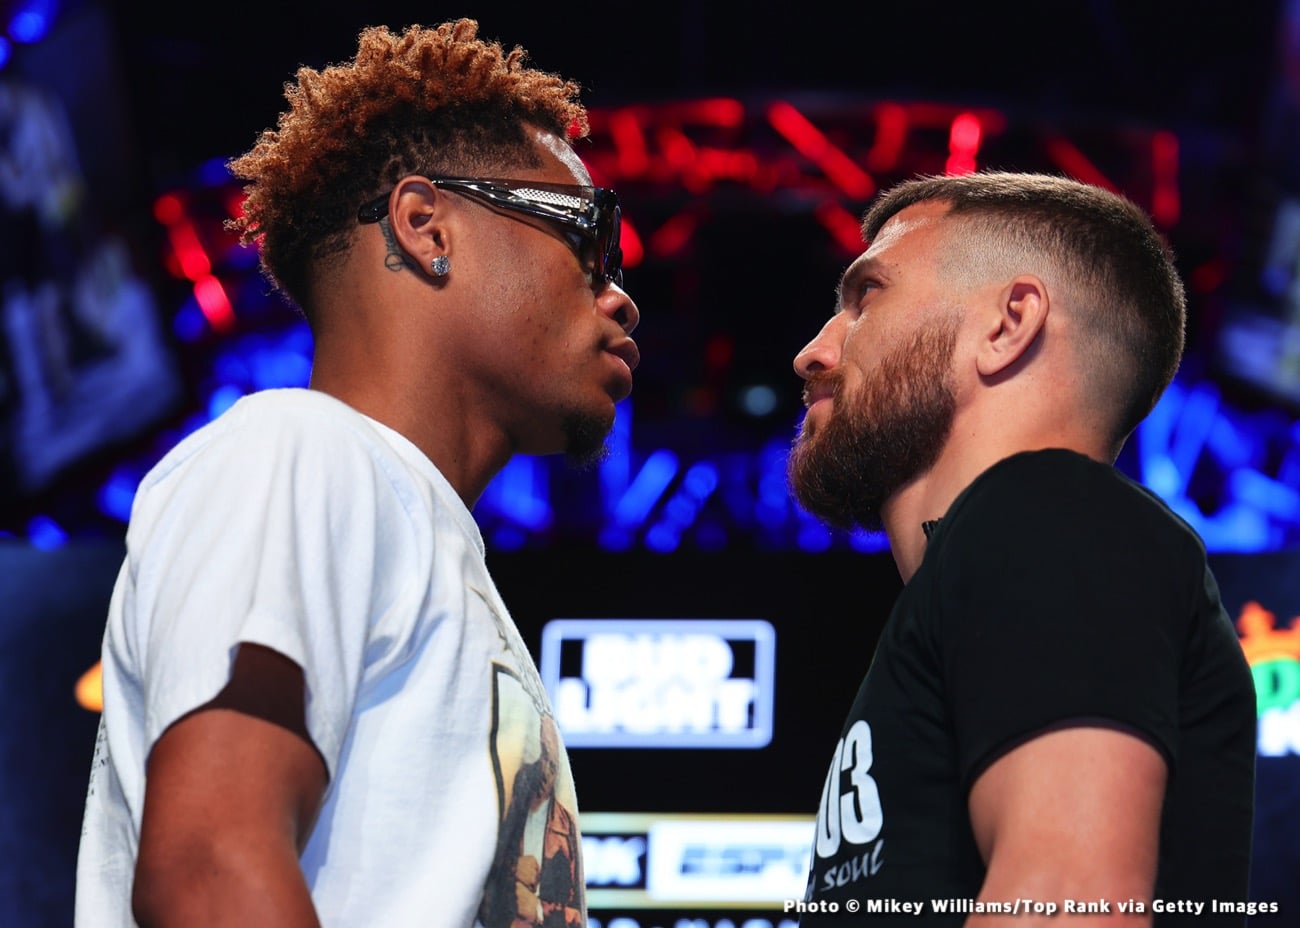 Image: Devin Haney not interested in Shakur & Gervonta questions, focused on Lomachenko